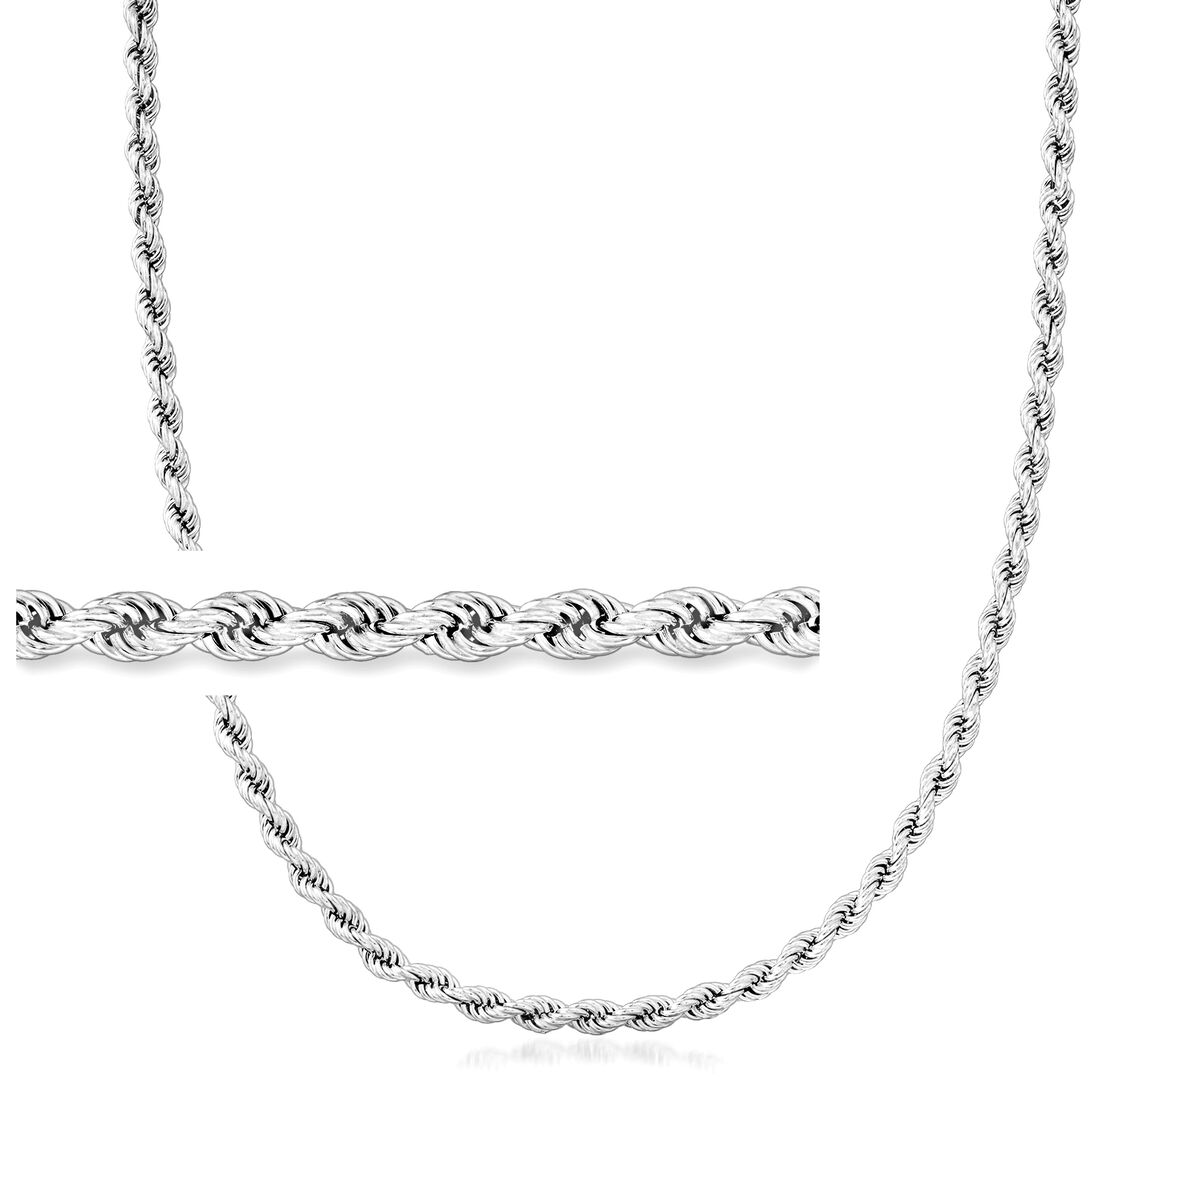 Ross-Simons - 4mm Sterling Silver Rope-Chain Necklace. 18